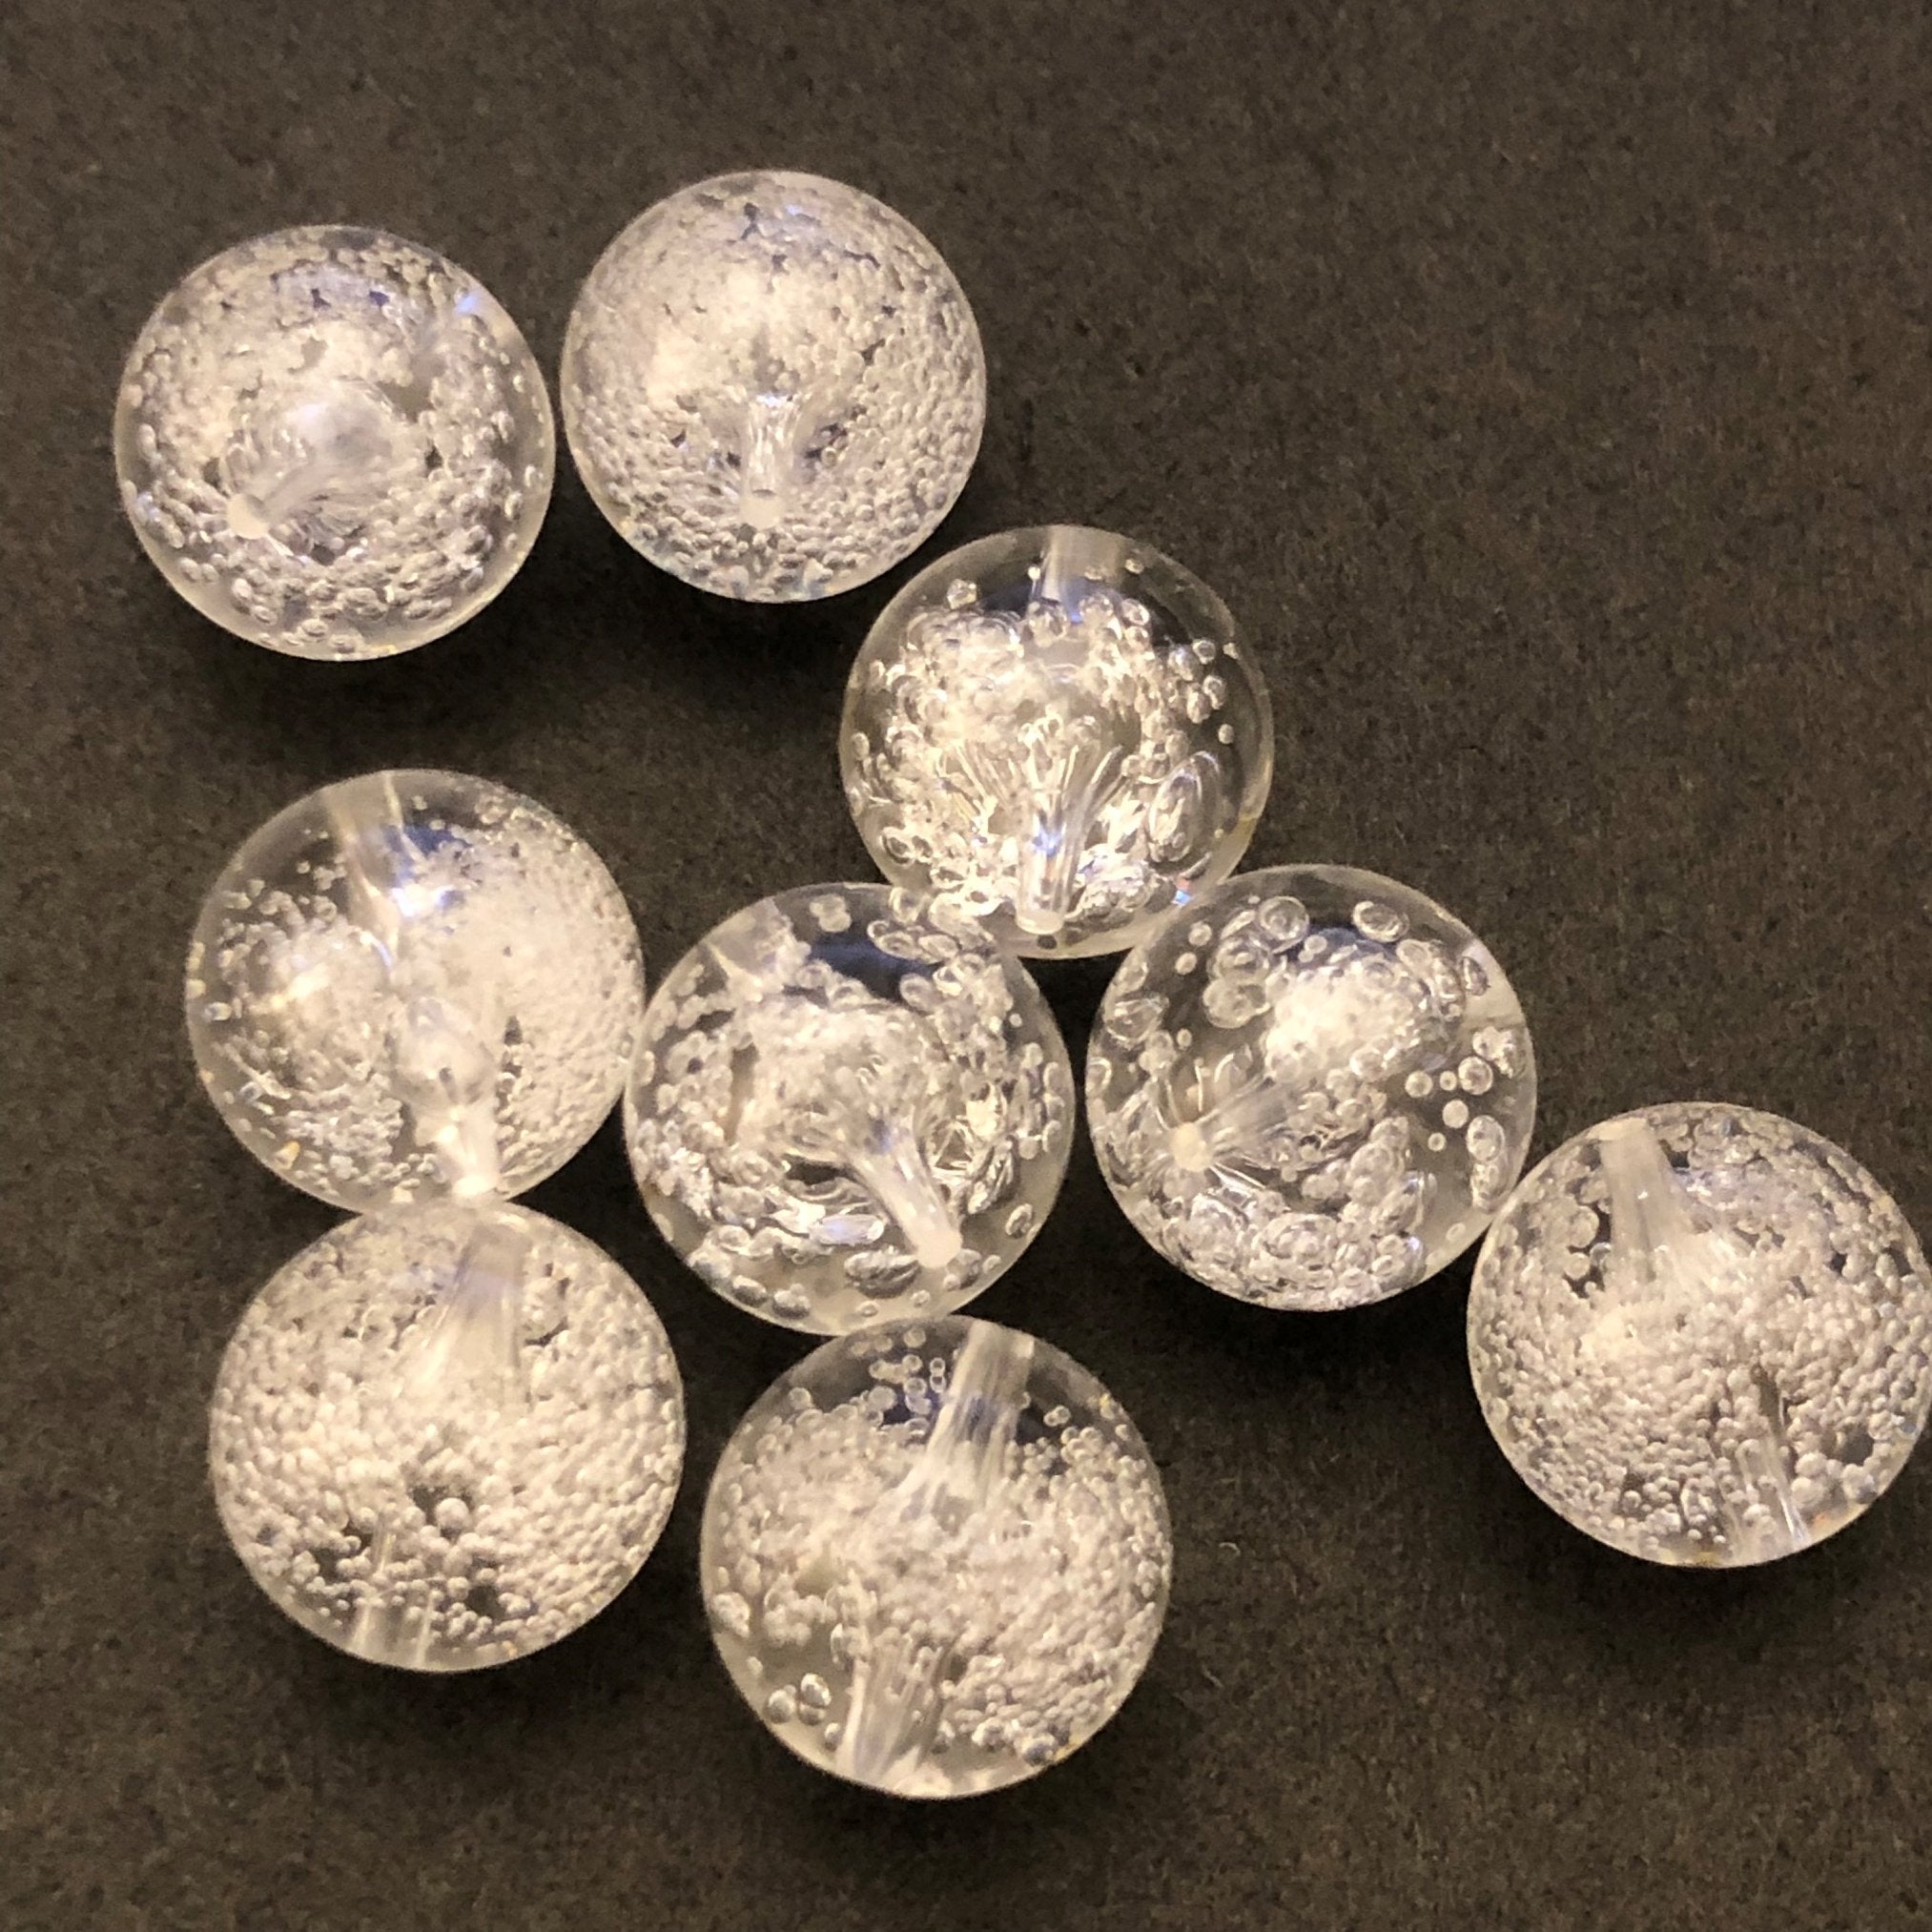 10MM Crystal "Bubbles" Beads (144 pieces)